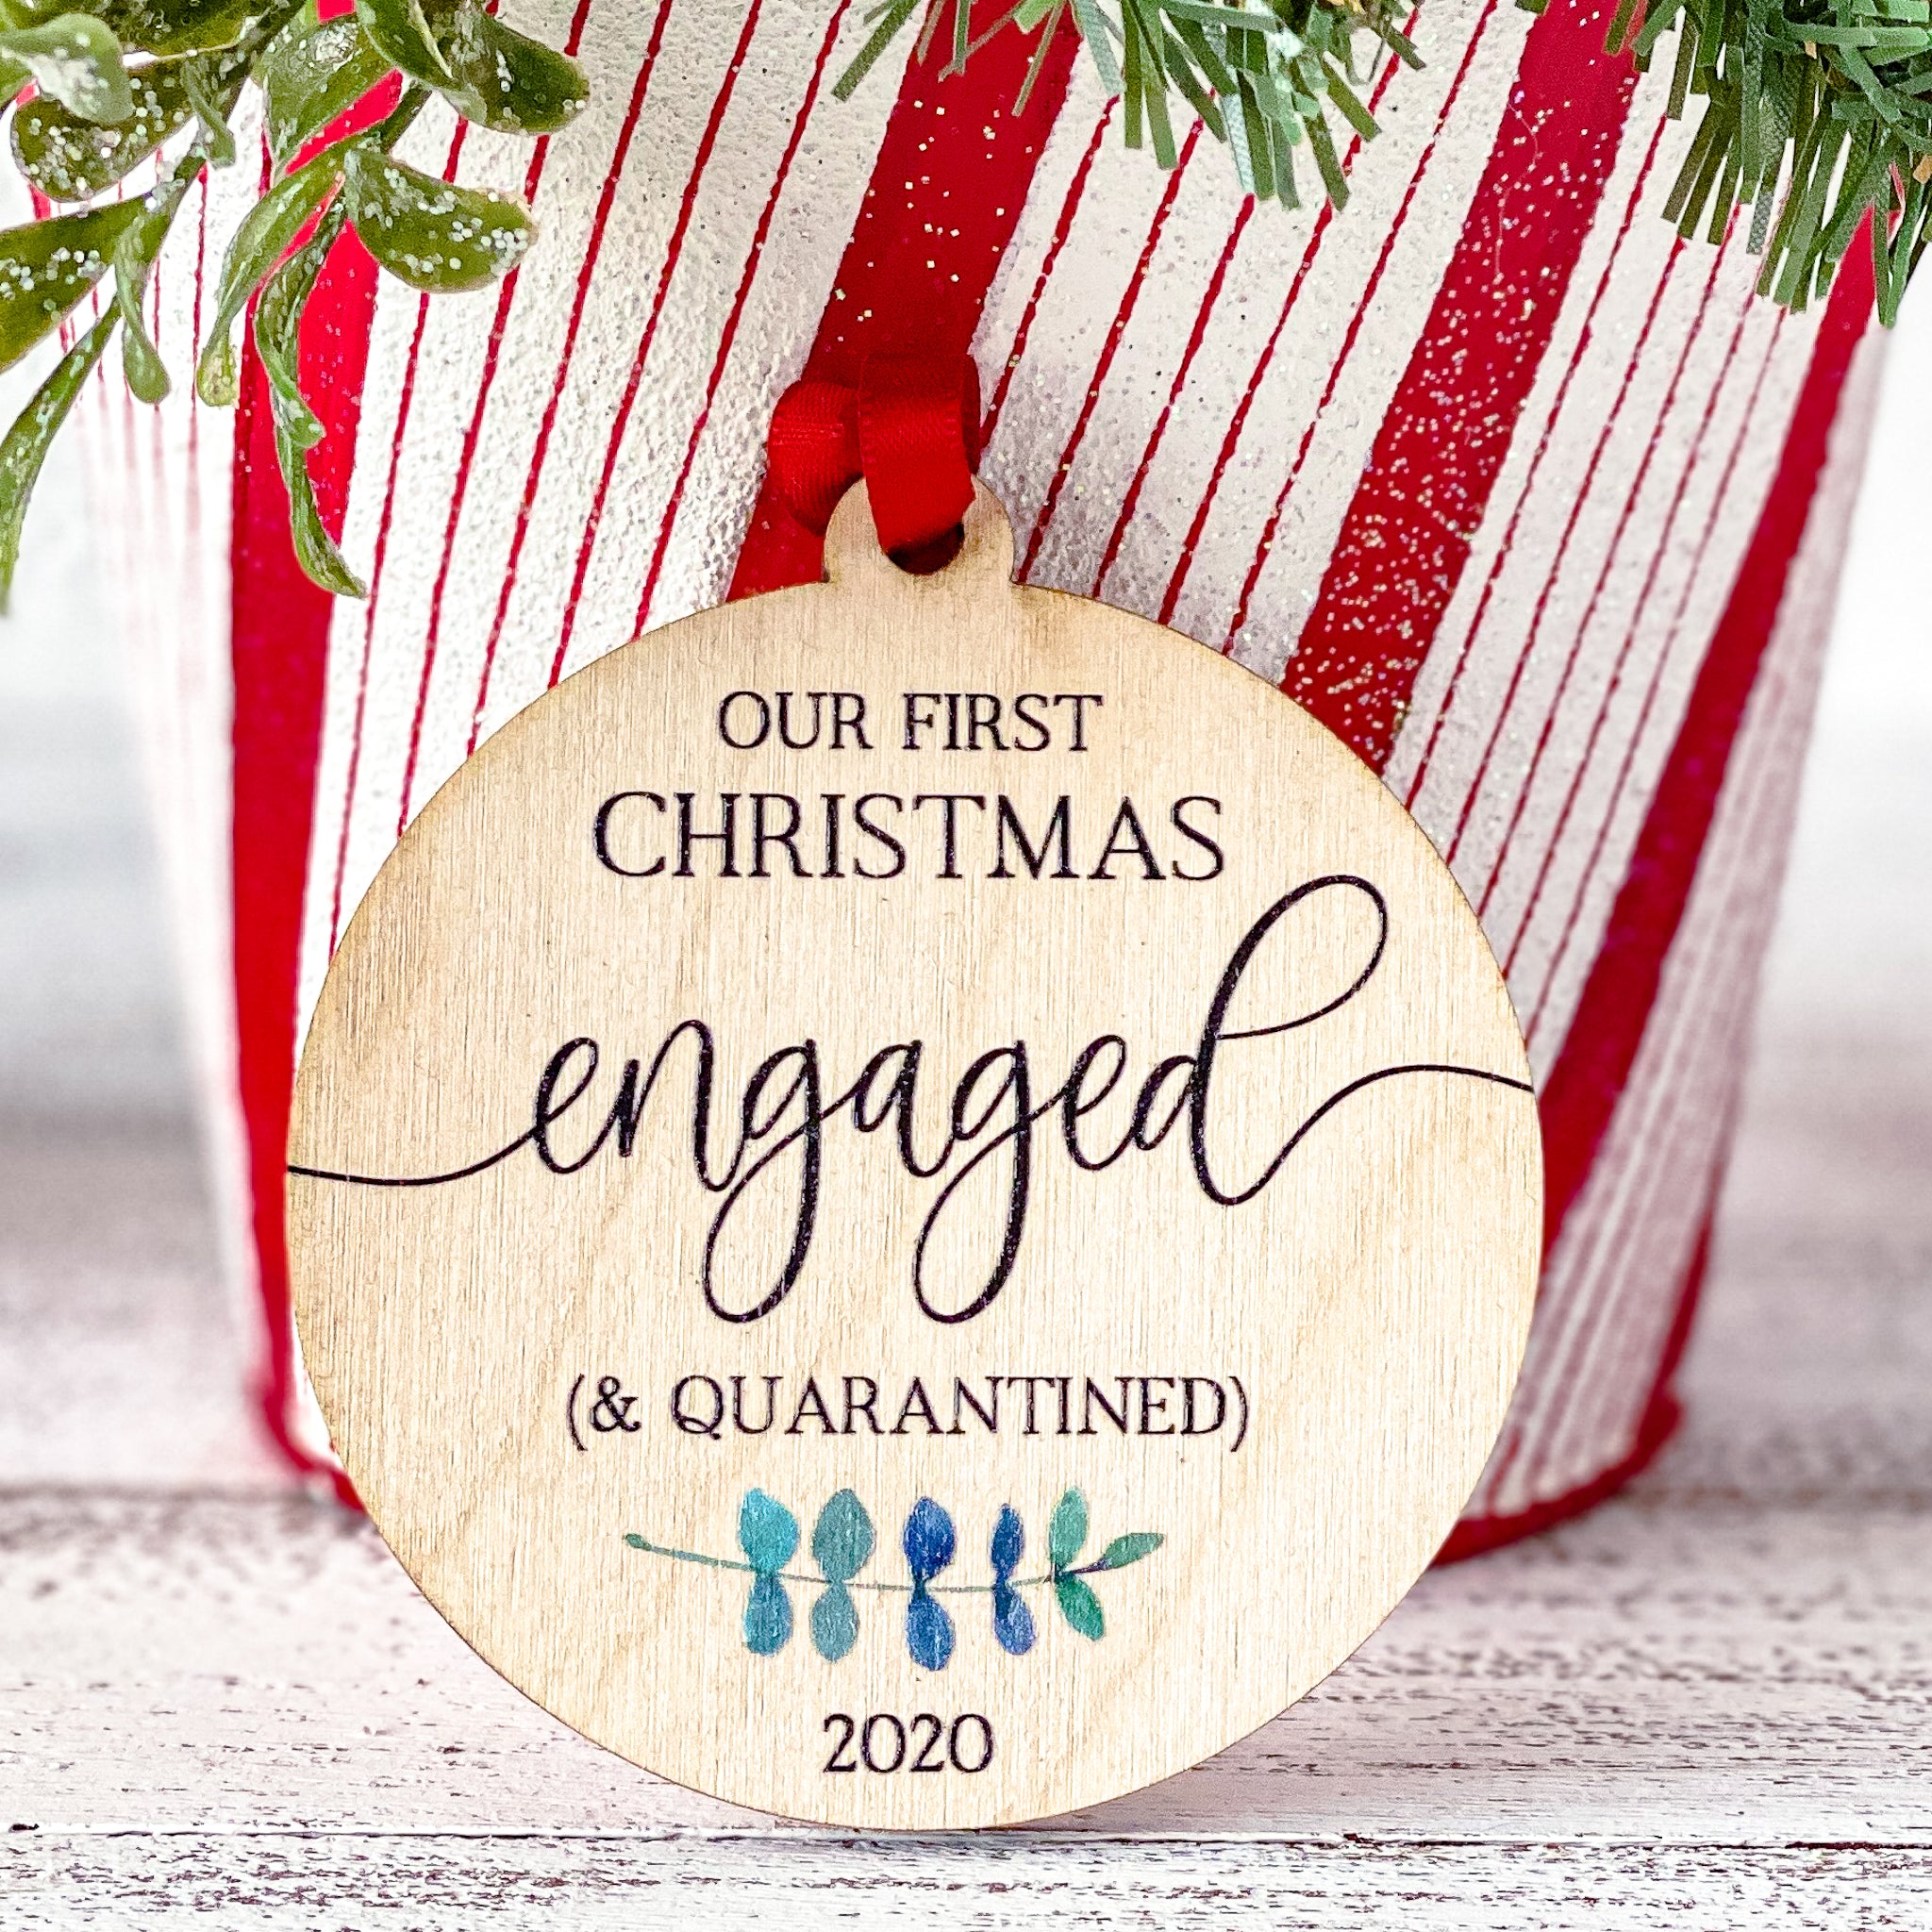 Download Our First Christmas Engaged & Quarantined Ornament